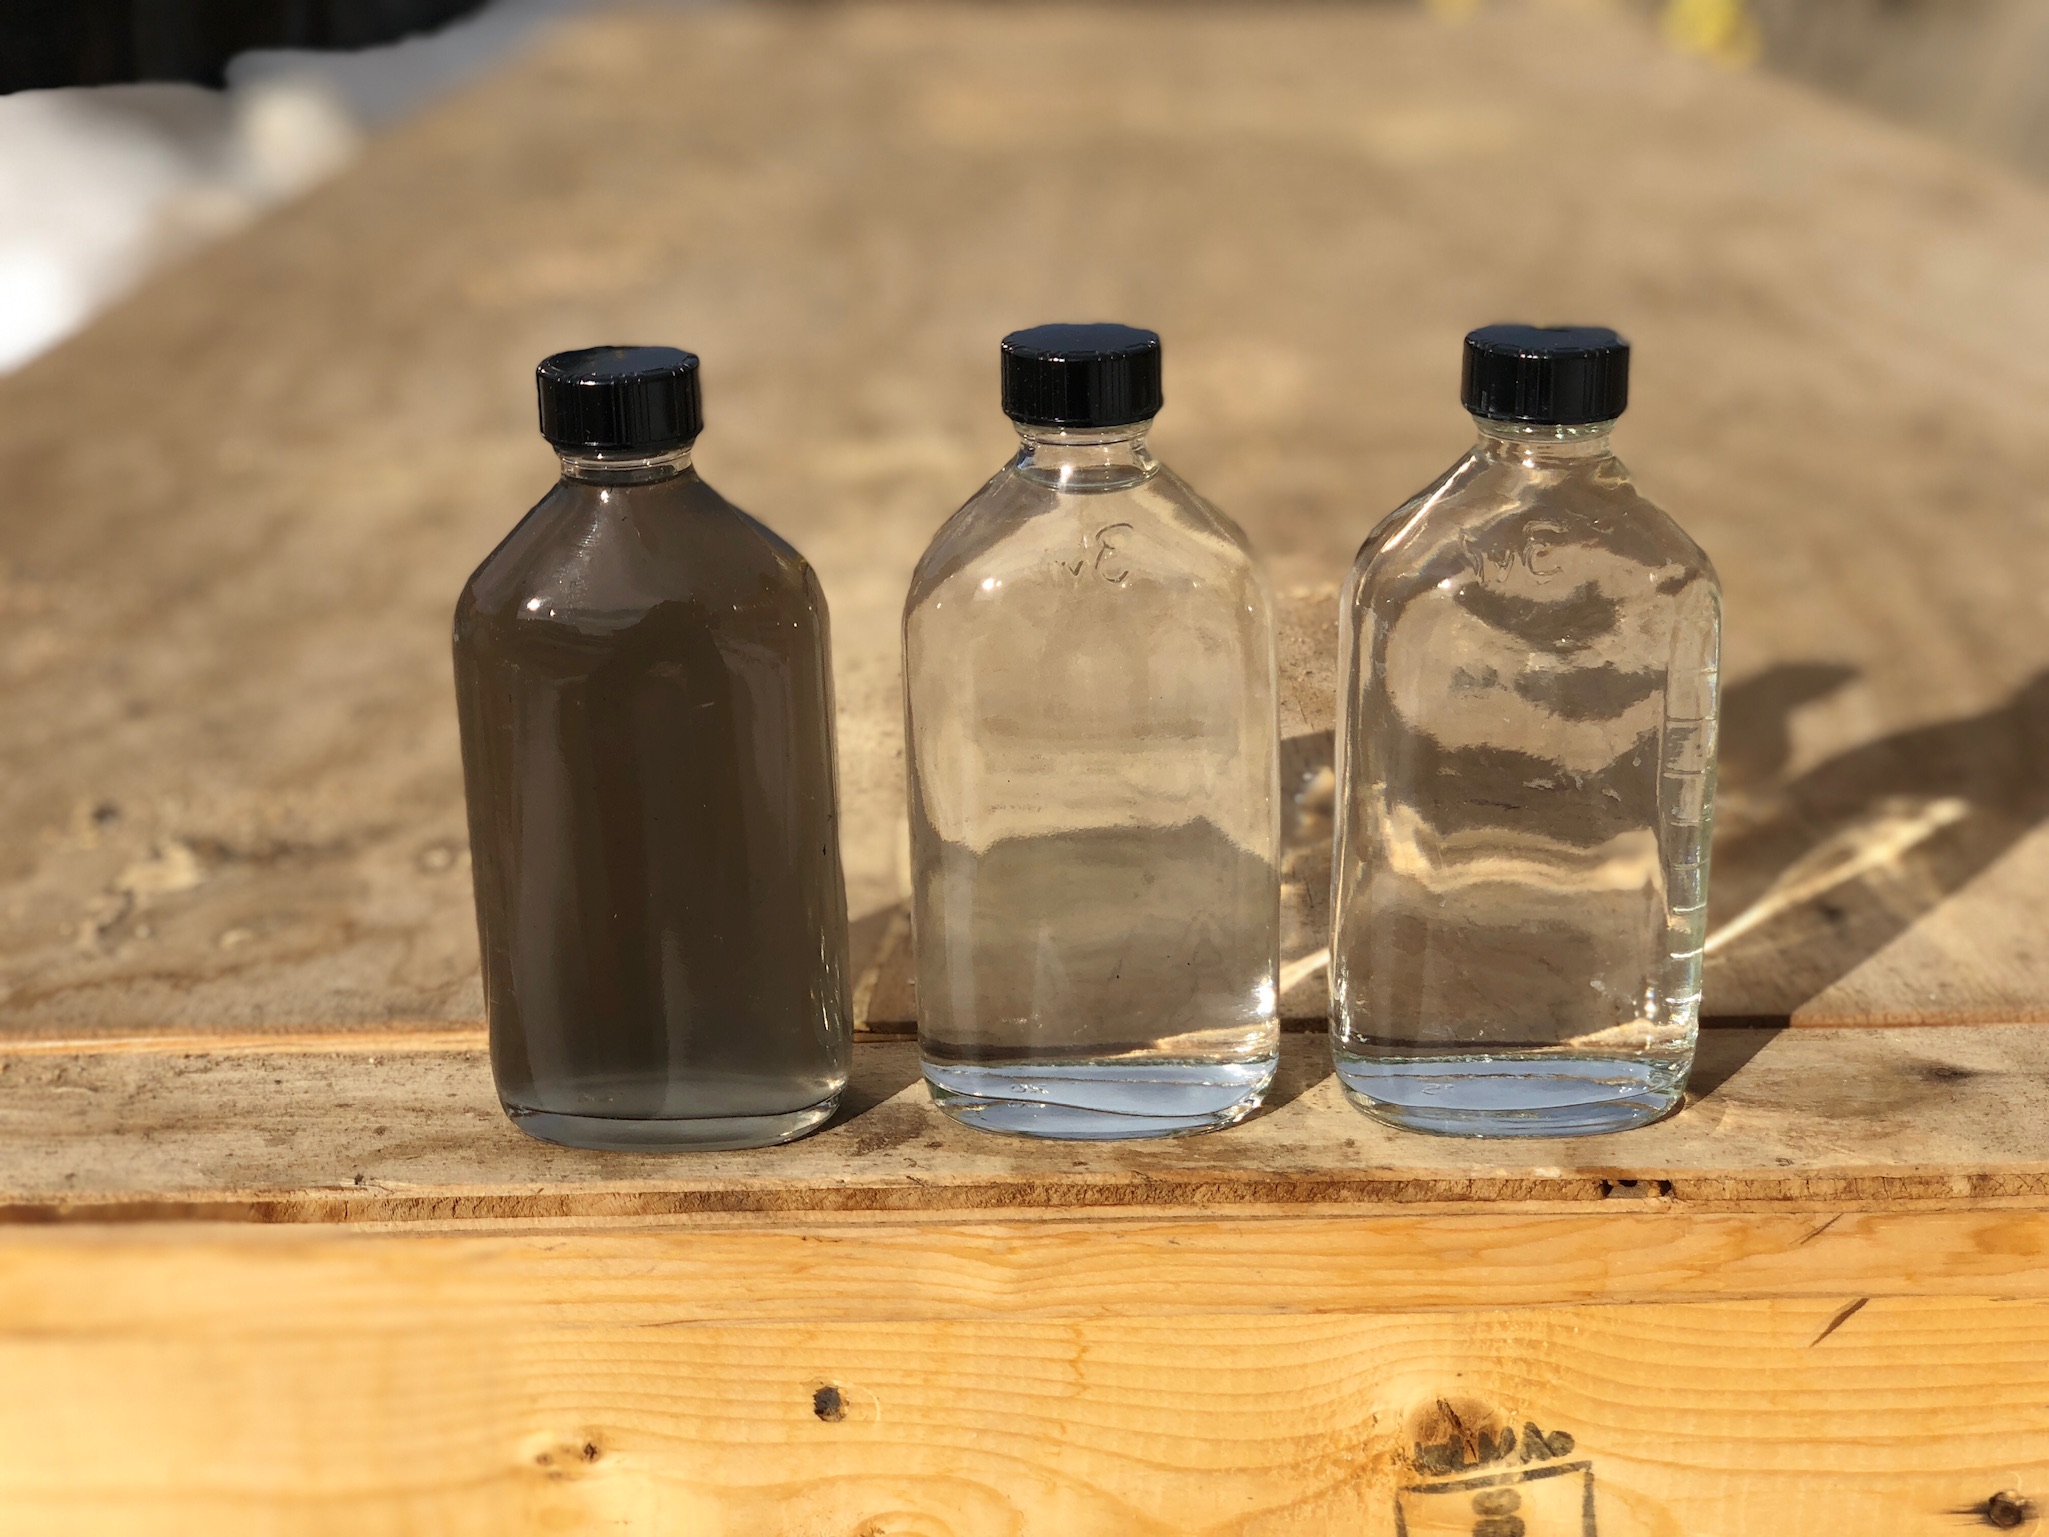 This blended produced and flowback water comparison shows water before (far left) and after treatments (middle and far right) with Monarch Separators’ H2O Floc and filtration. (Source: Monarch Separators)